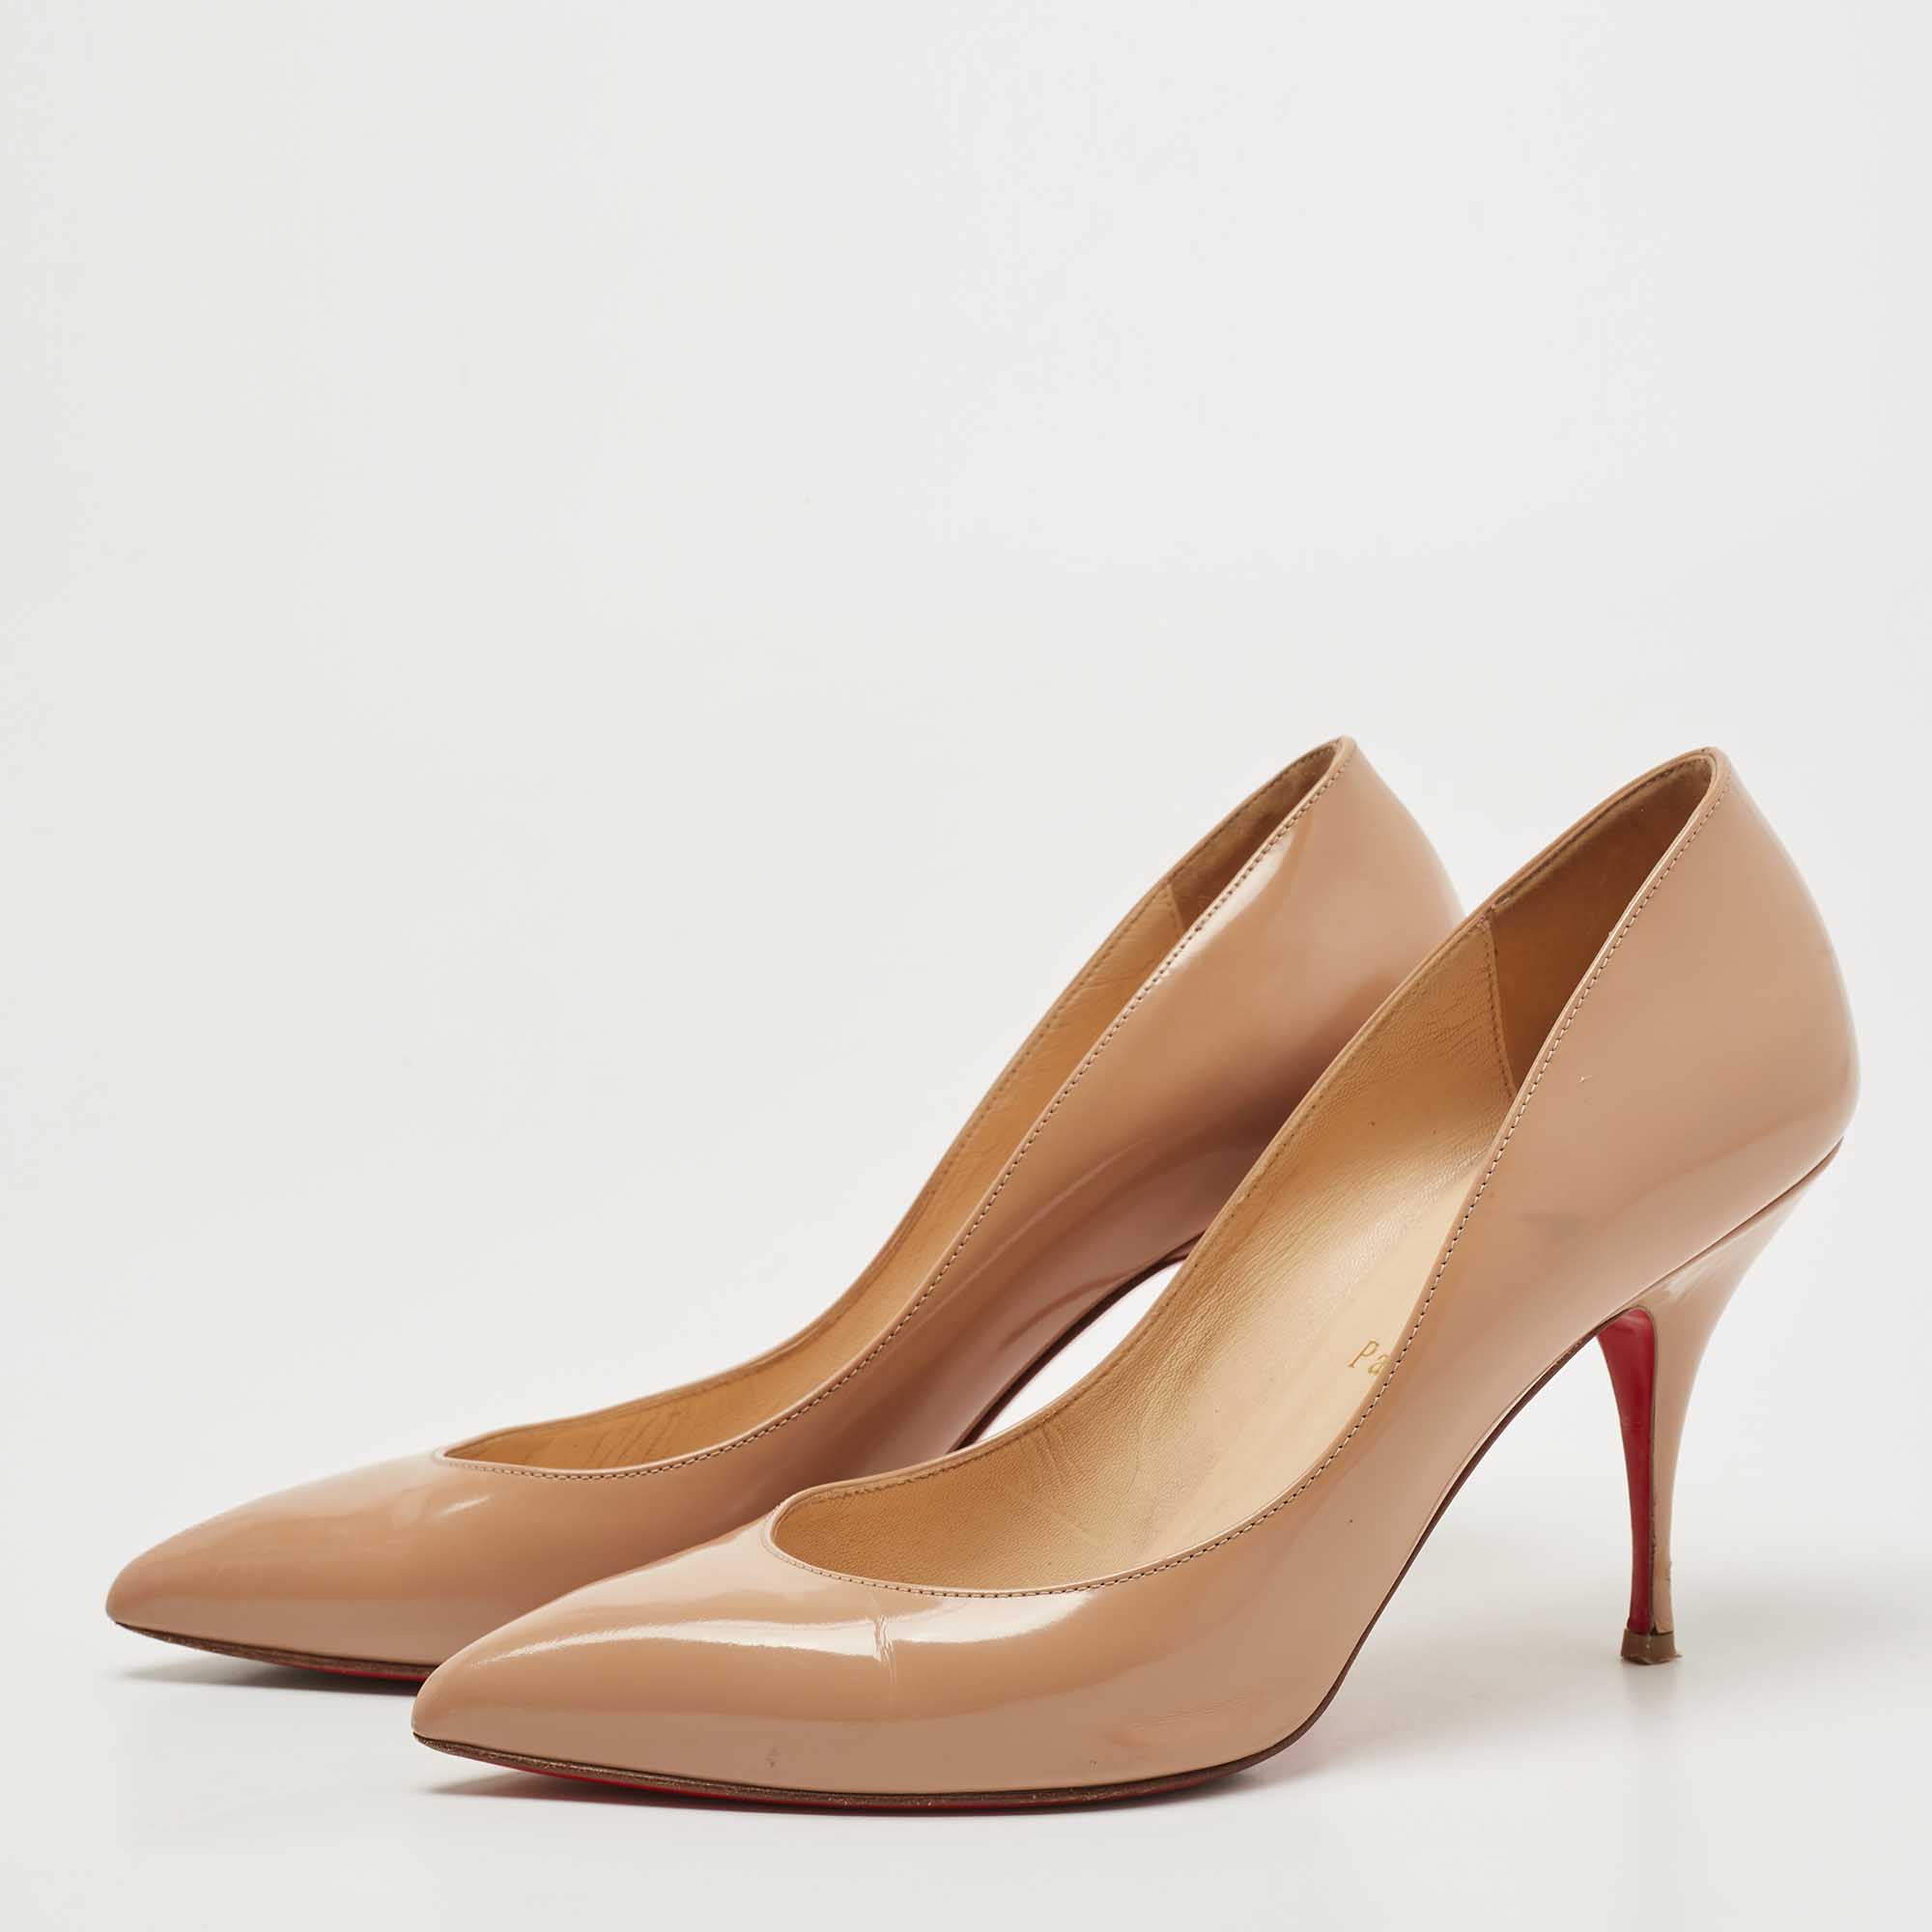 

Christian Louboutin Beige Patent Leather Pigalle Follies Pumps Size